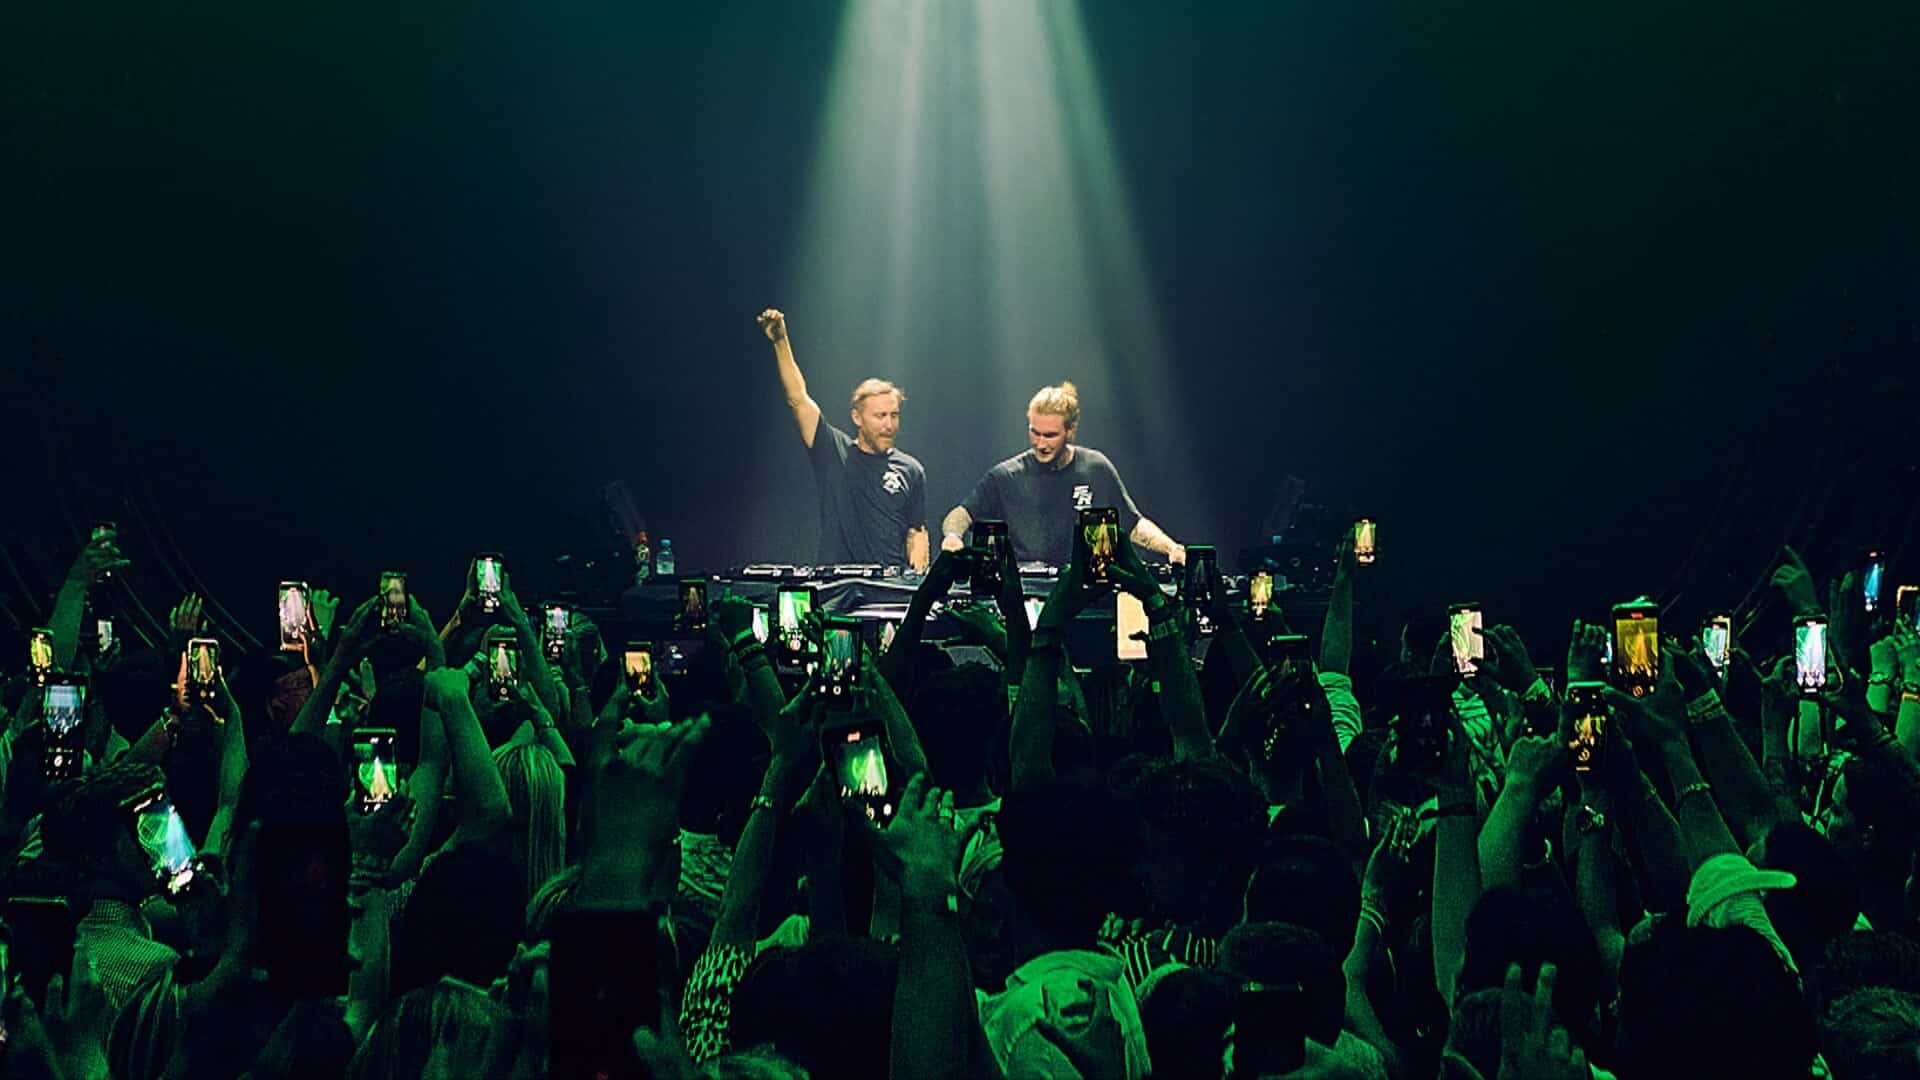 David Guetta, MORTEN, and Prophecy expand the Future Rave catalog with ‘Kill The Vibe’: Listen